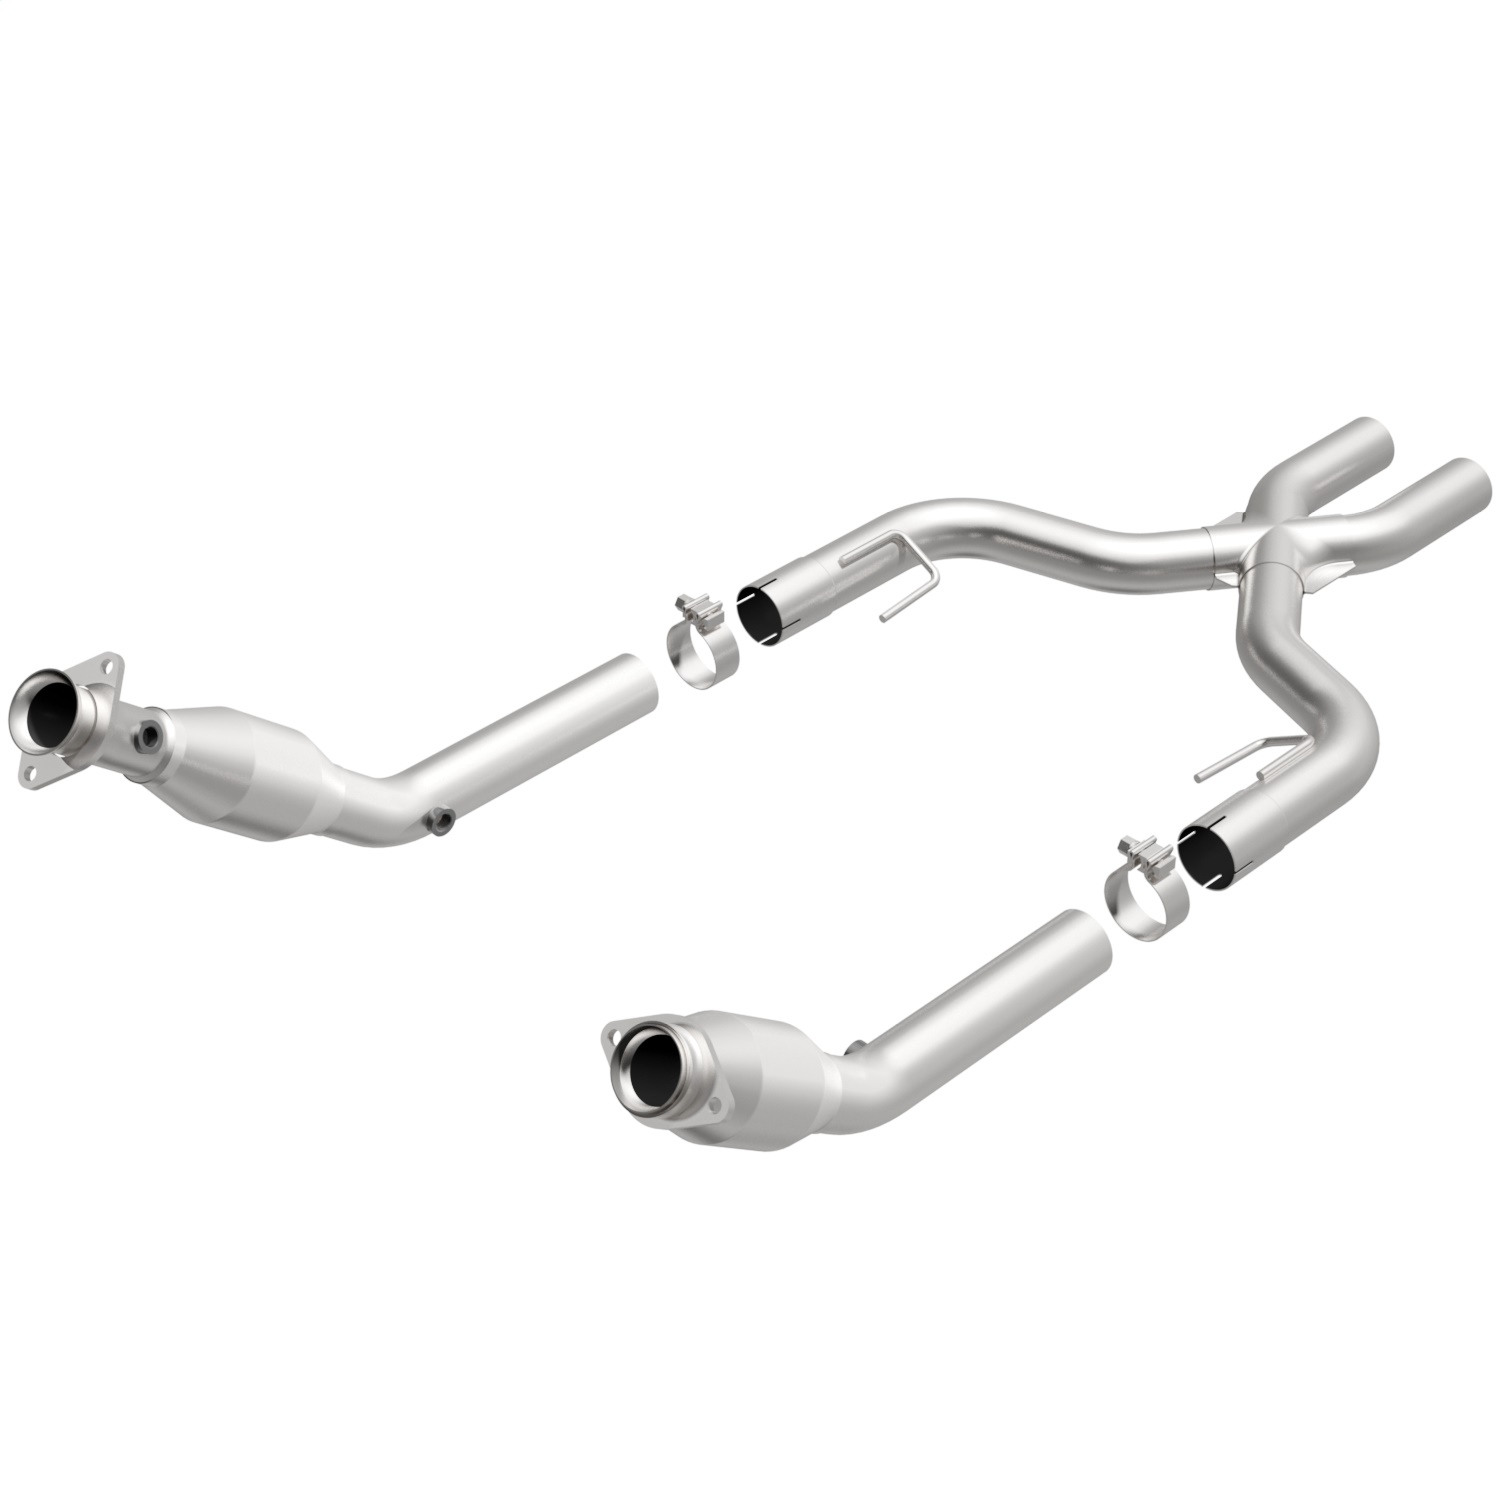 Magnaflow Performance Exhaust Magnaflow Performance Exhaust 16433 Direct Fit Off-Road X-Pipe Fits Mustang